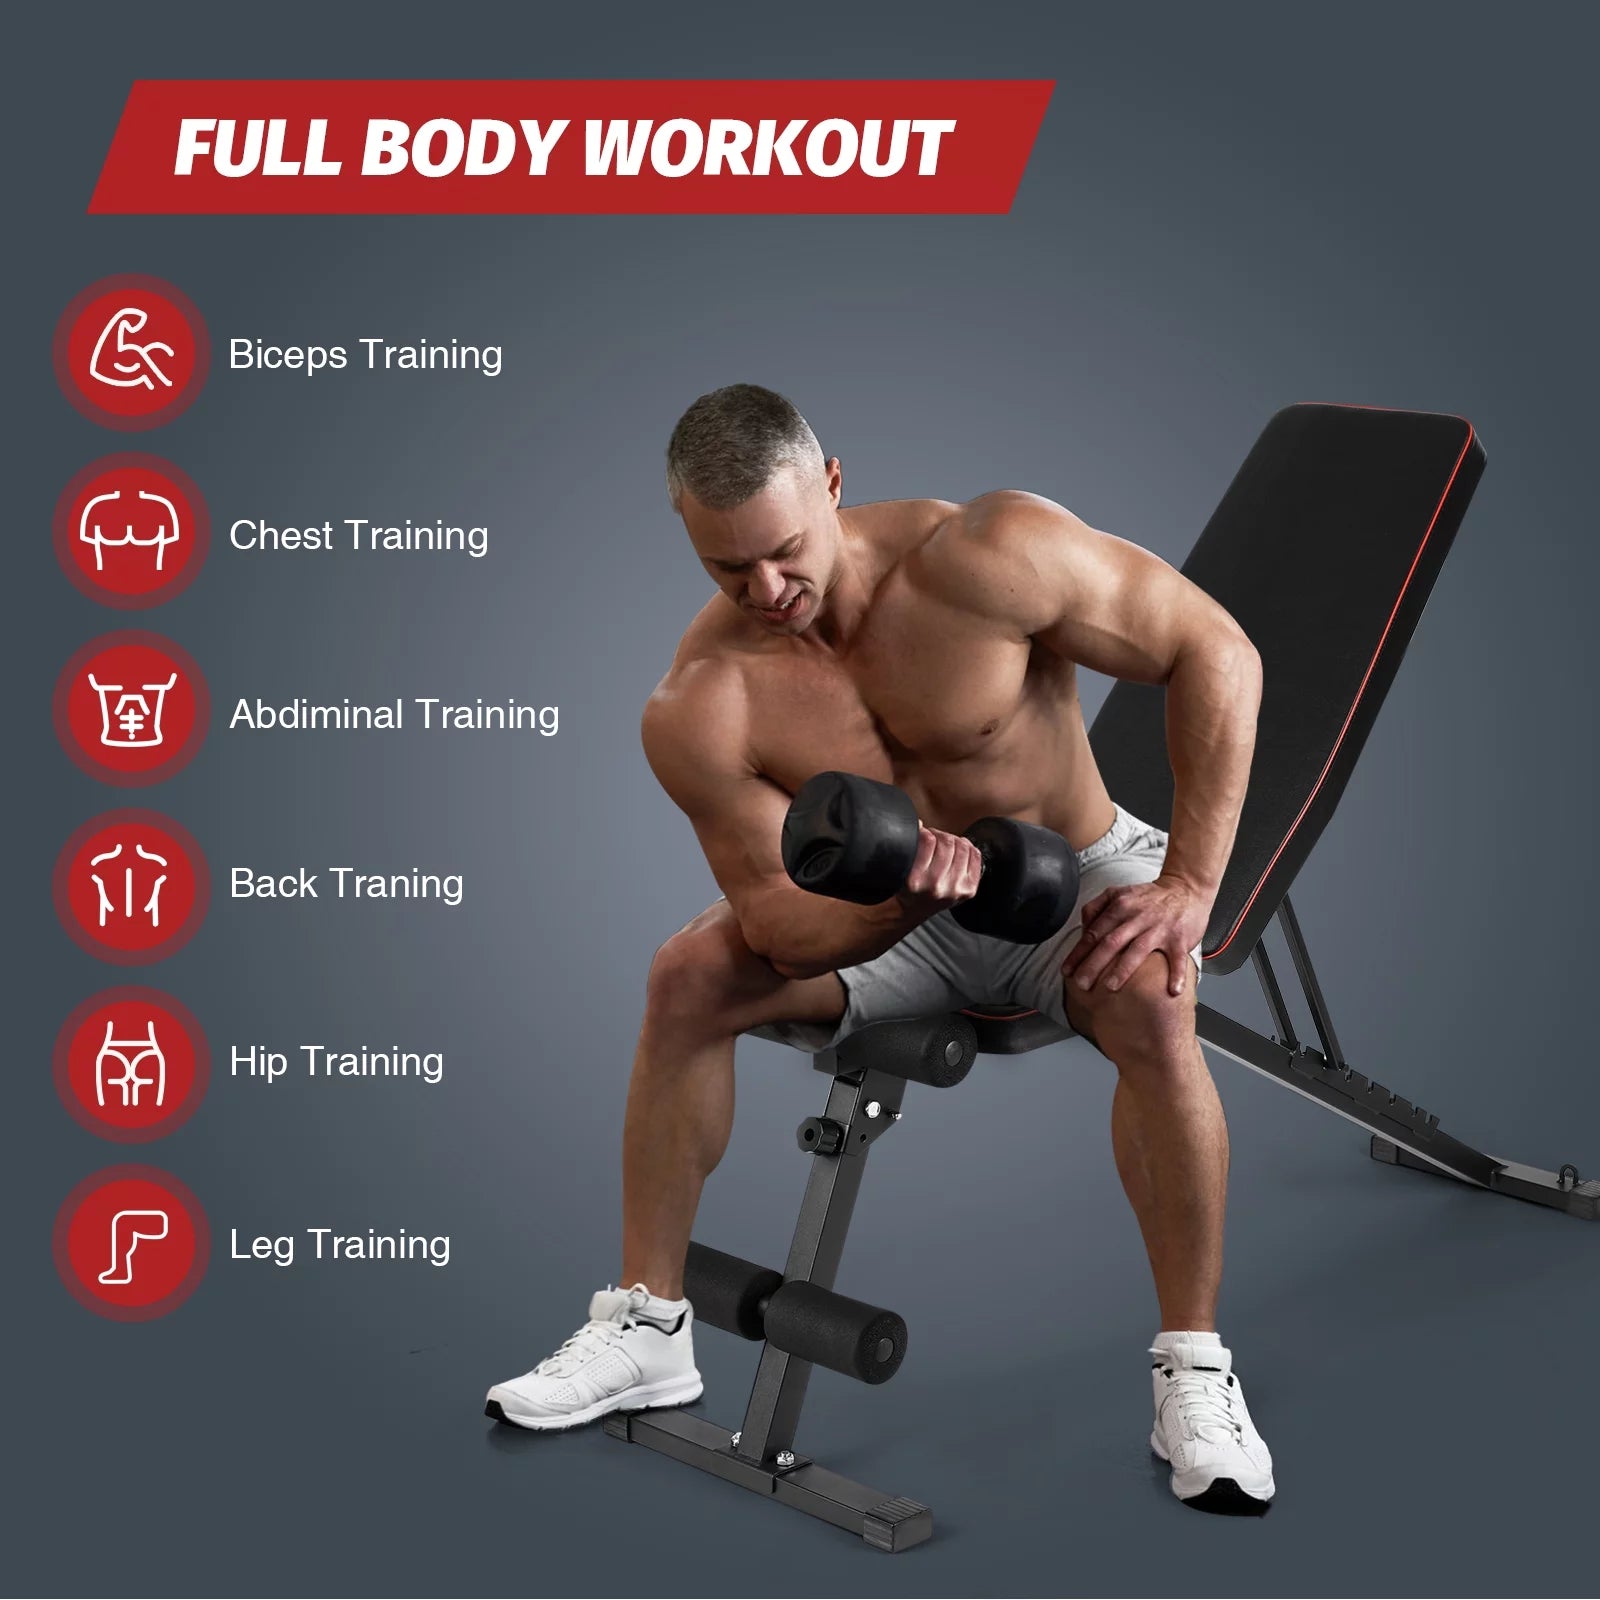 Adjustable Weight Bench for Full Body Workouts Exercise Training